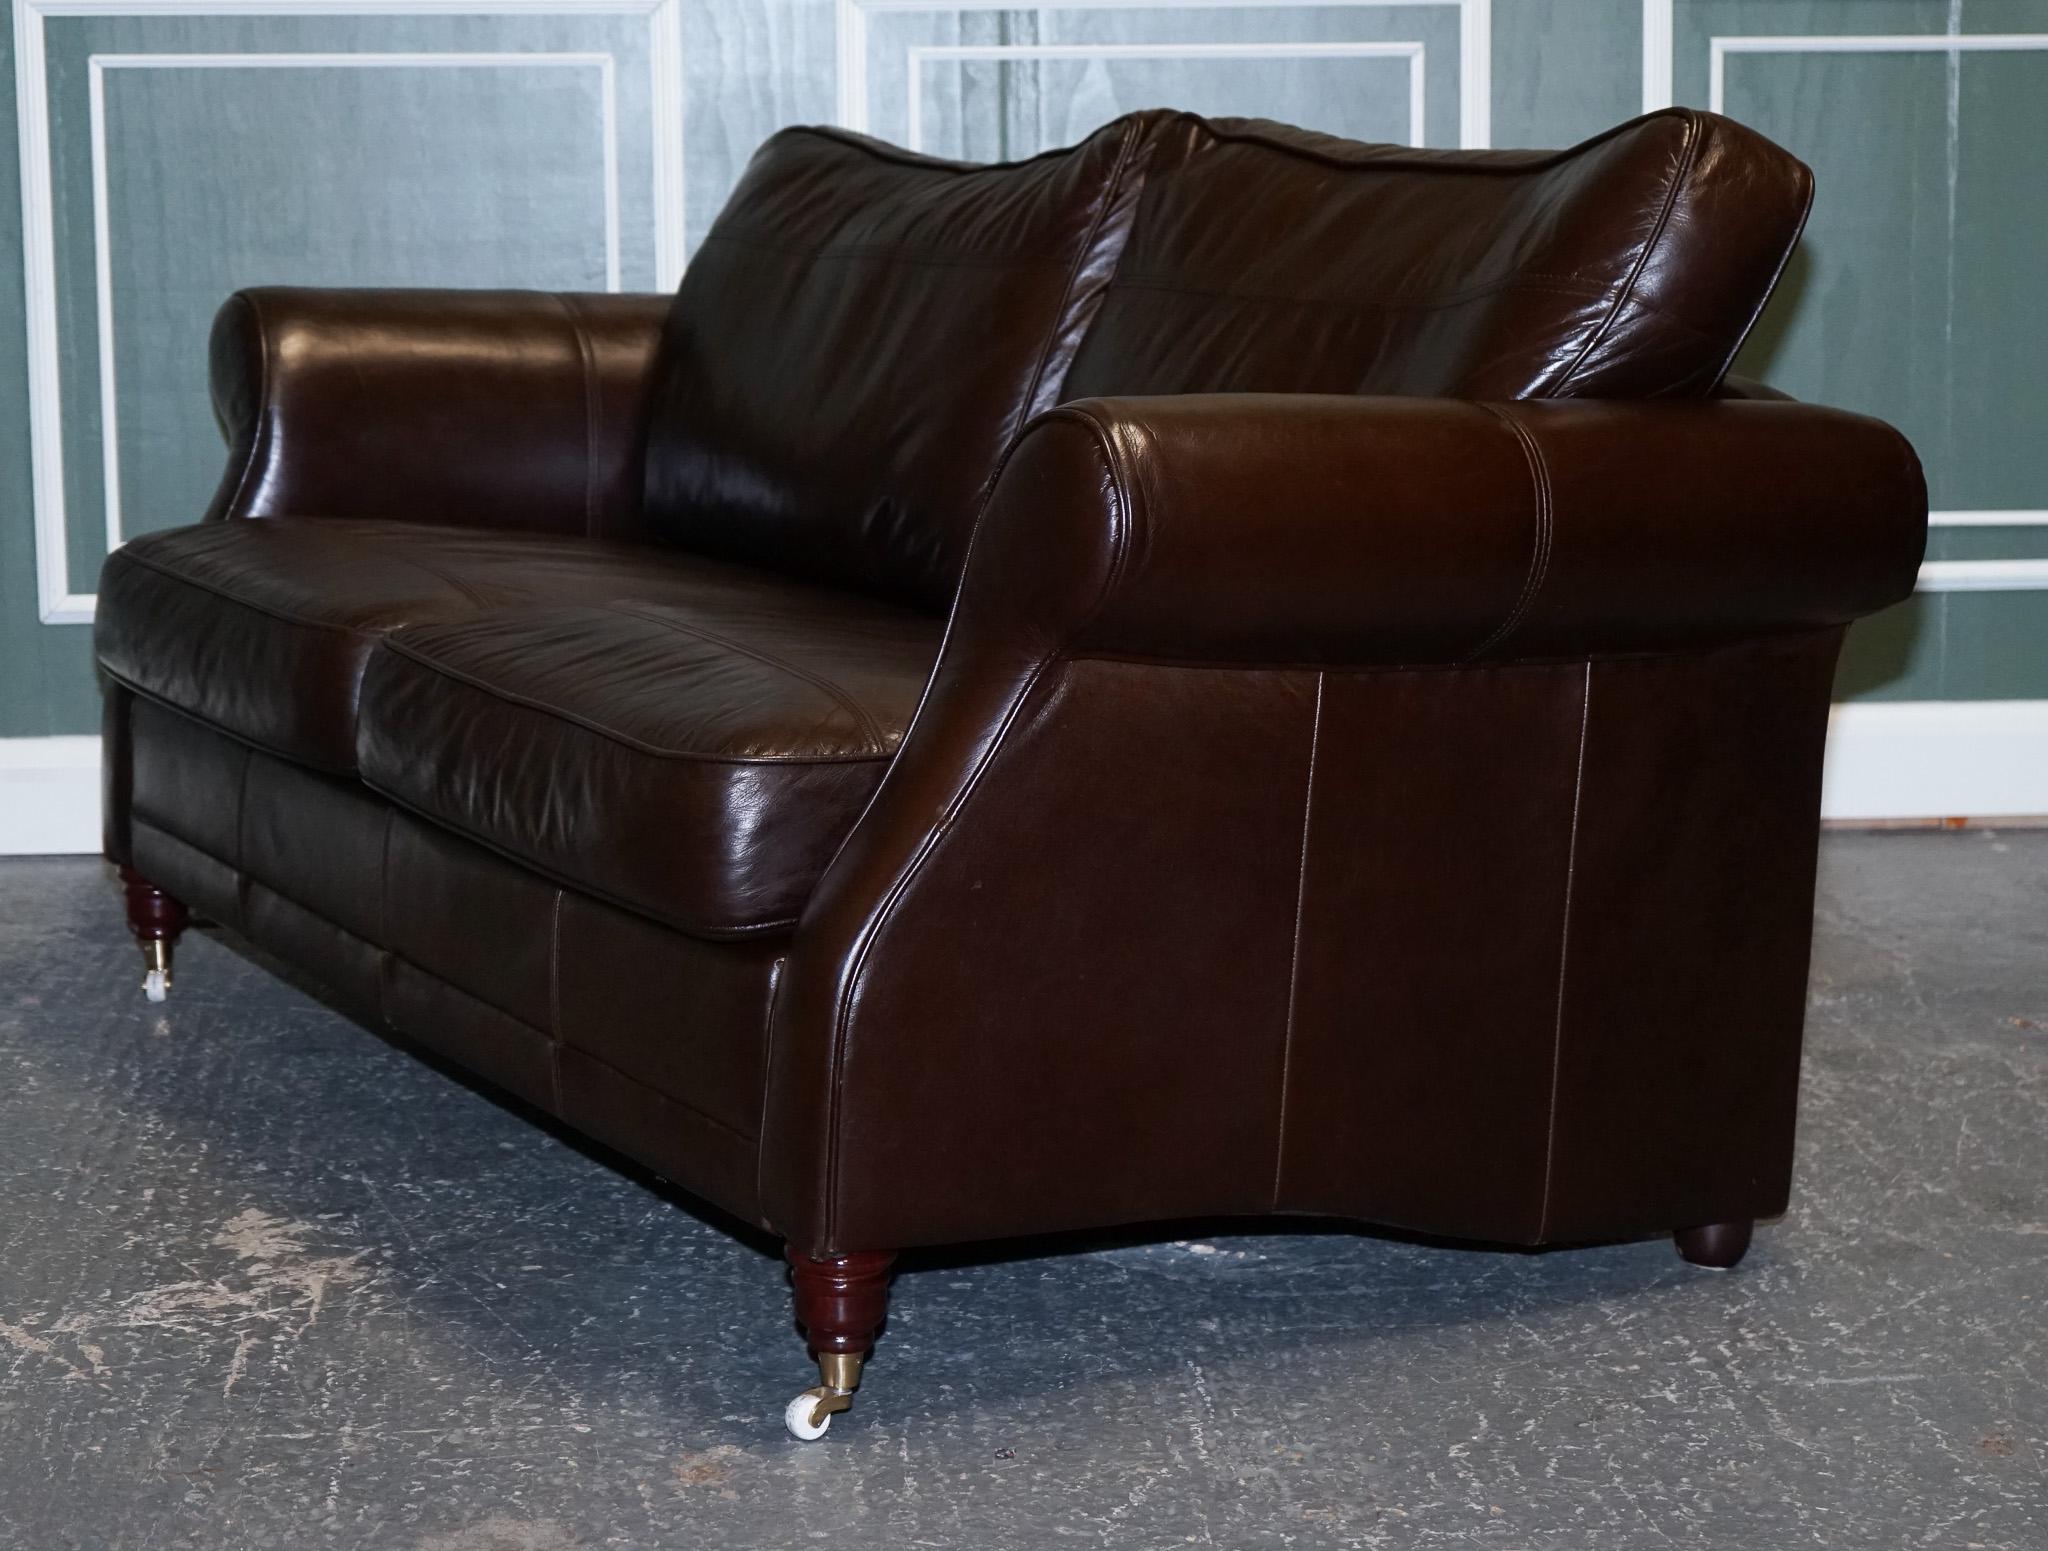 SOFA VINTAGE STUNNiNG CHOCOLATE BROWN LEATHER 2 TO 3 SEATER en vente 6